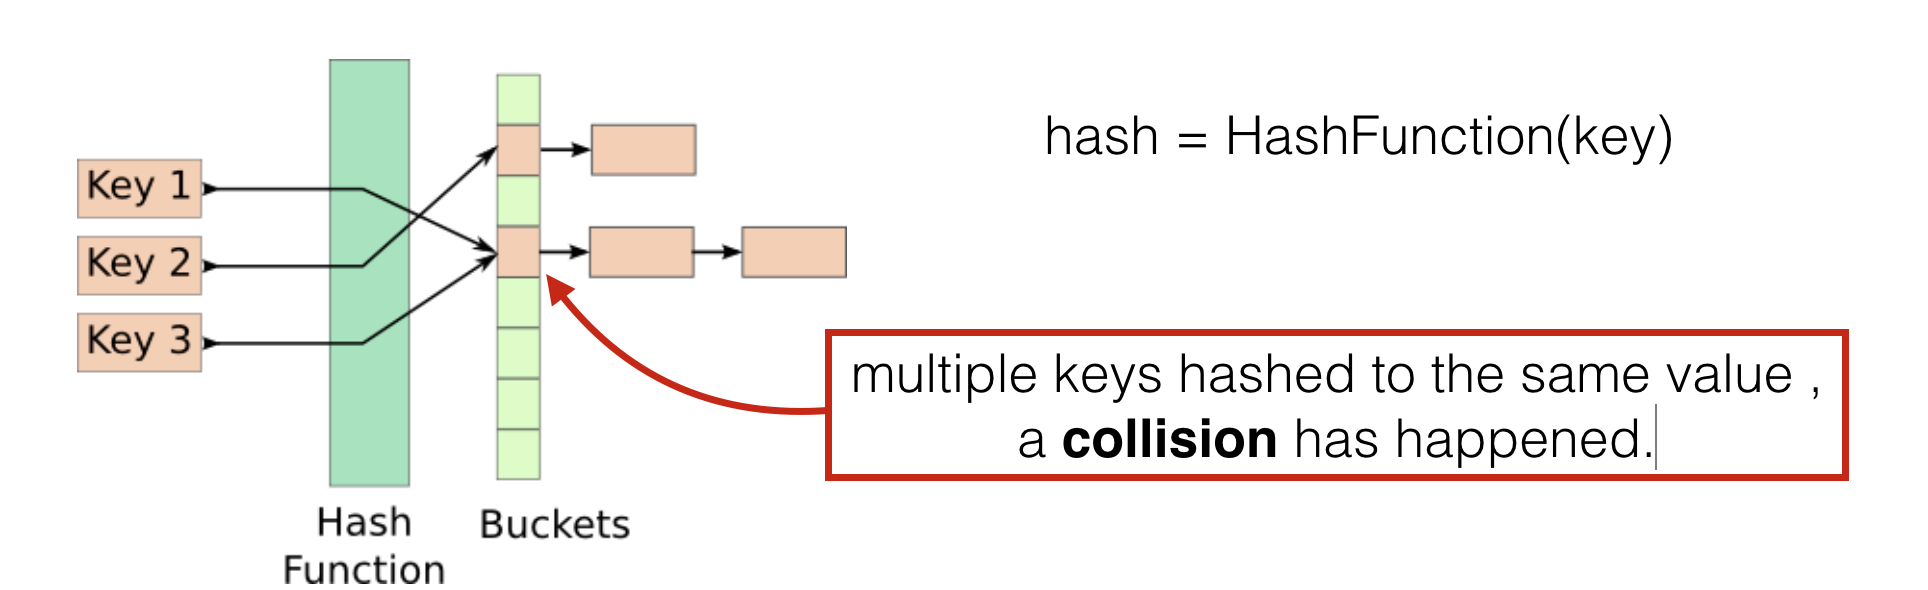 hashtable.png